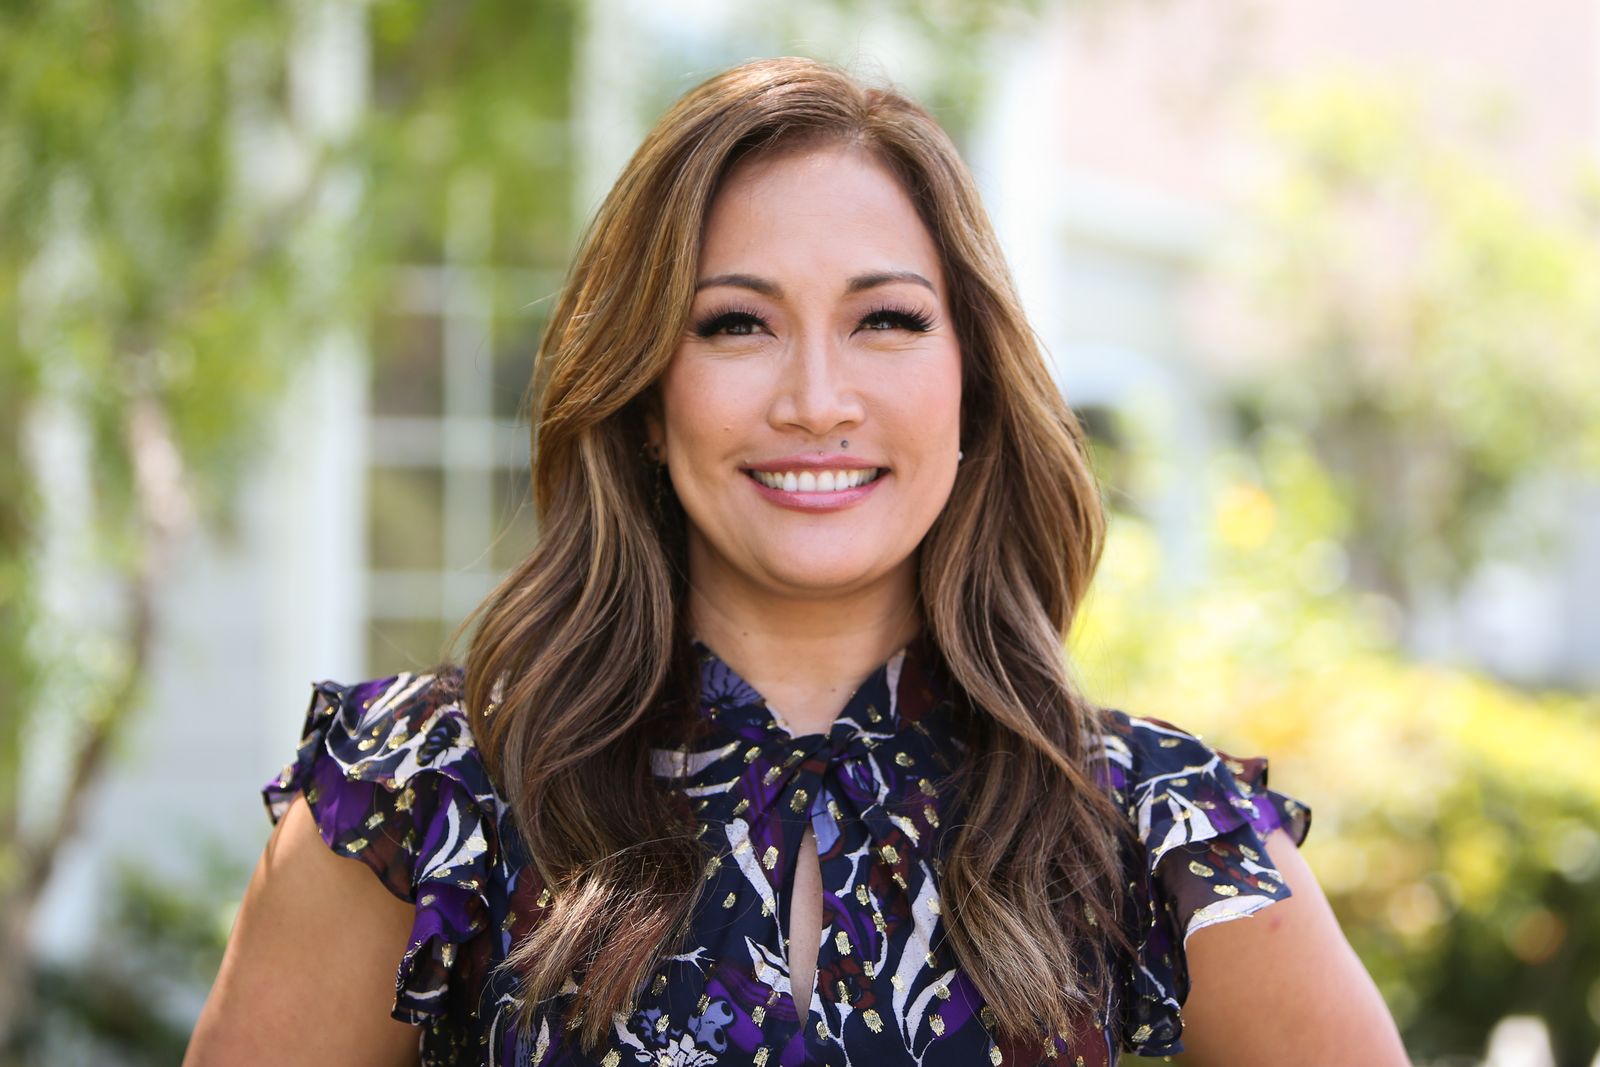 Carrie Ann Inaba visits Hallmark's "Home & Family" at Universal Studios Hollywood on May 3, 2019, in Universal City, California | Photo: Getty Images